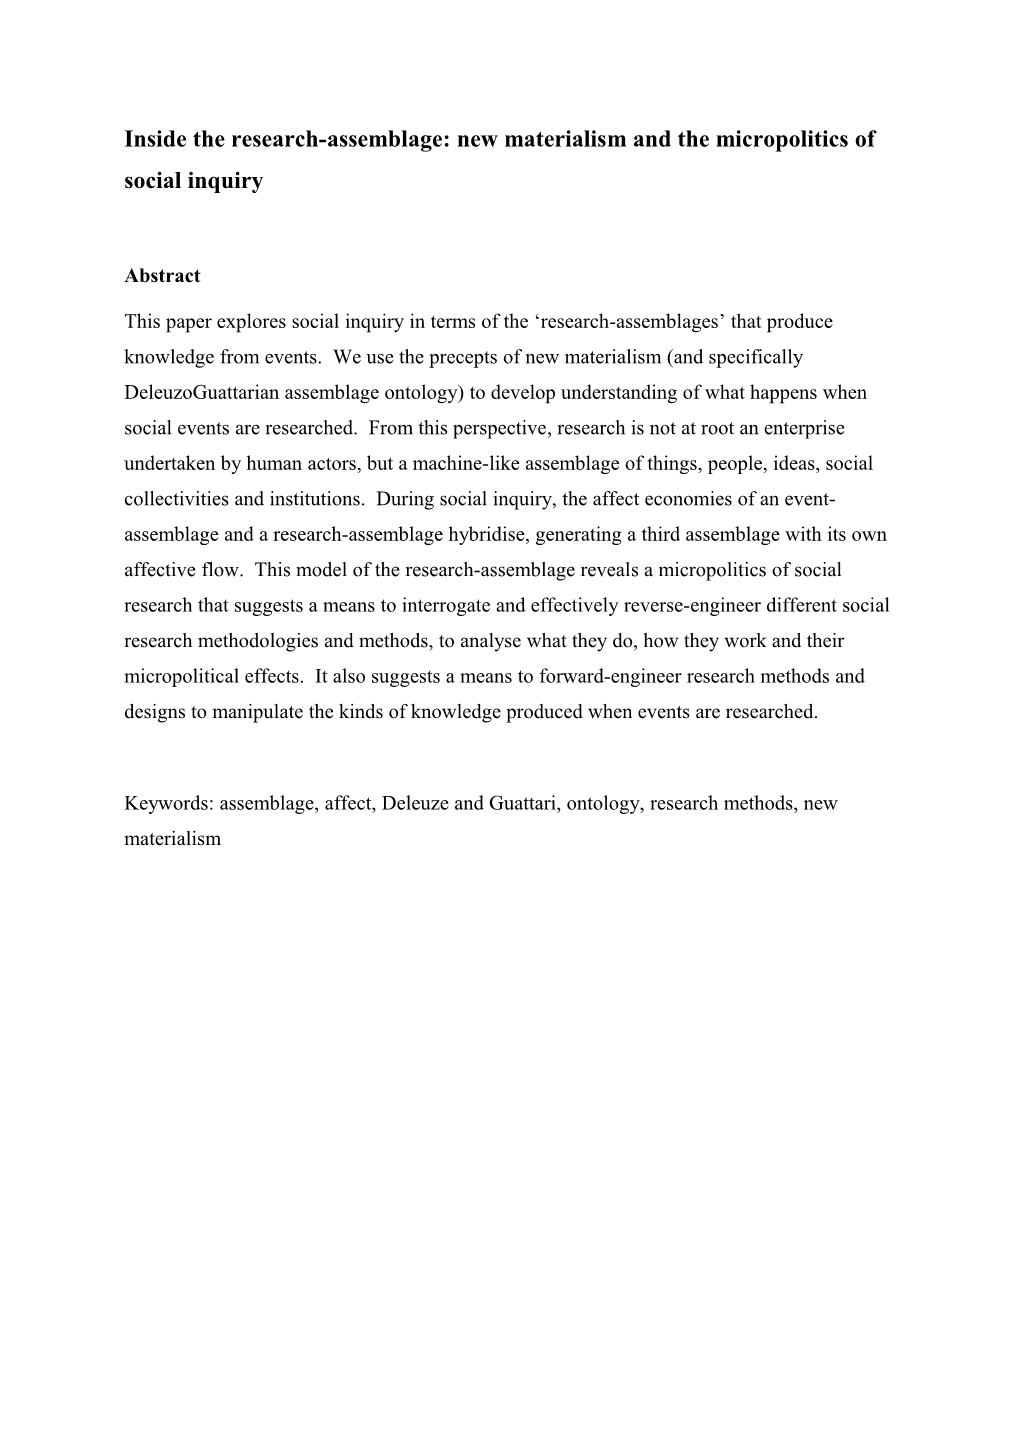 Inside the Research-Assemblage: New Materialism and the Micropolitics of Social Inquiry